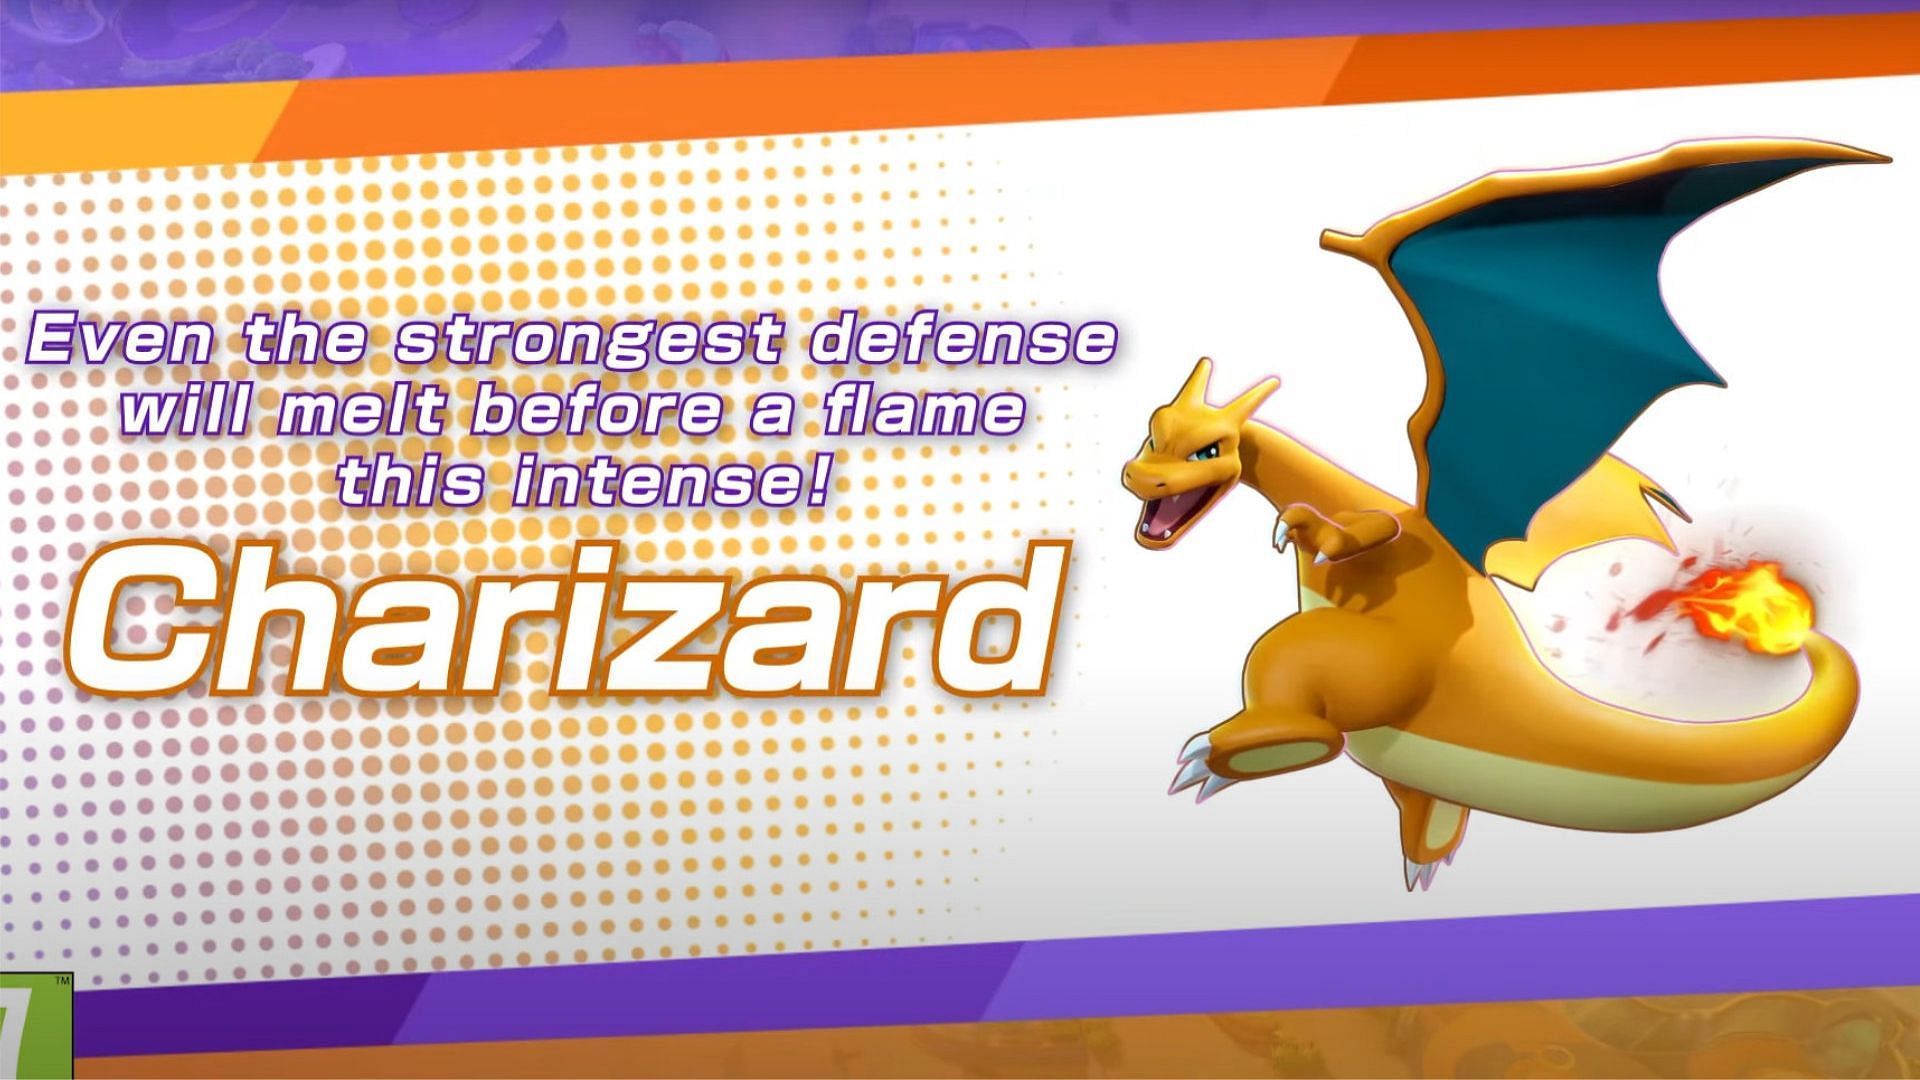 Official imagery for Charizard used for Pokemon Unite (Image via The Pokemon Company)